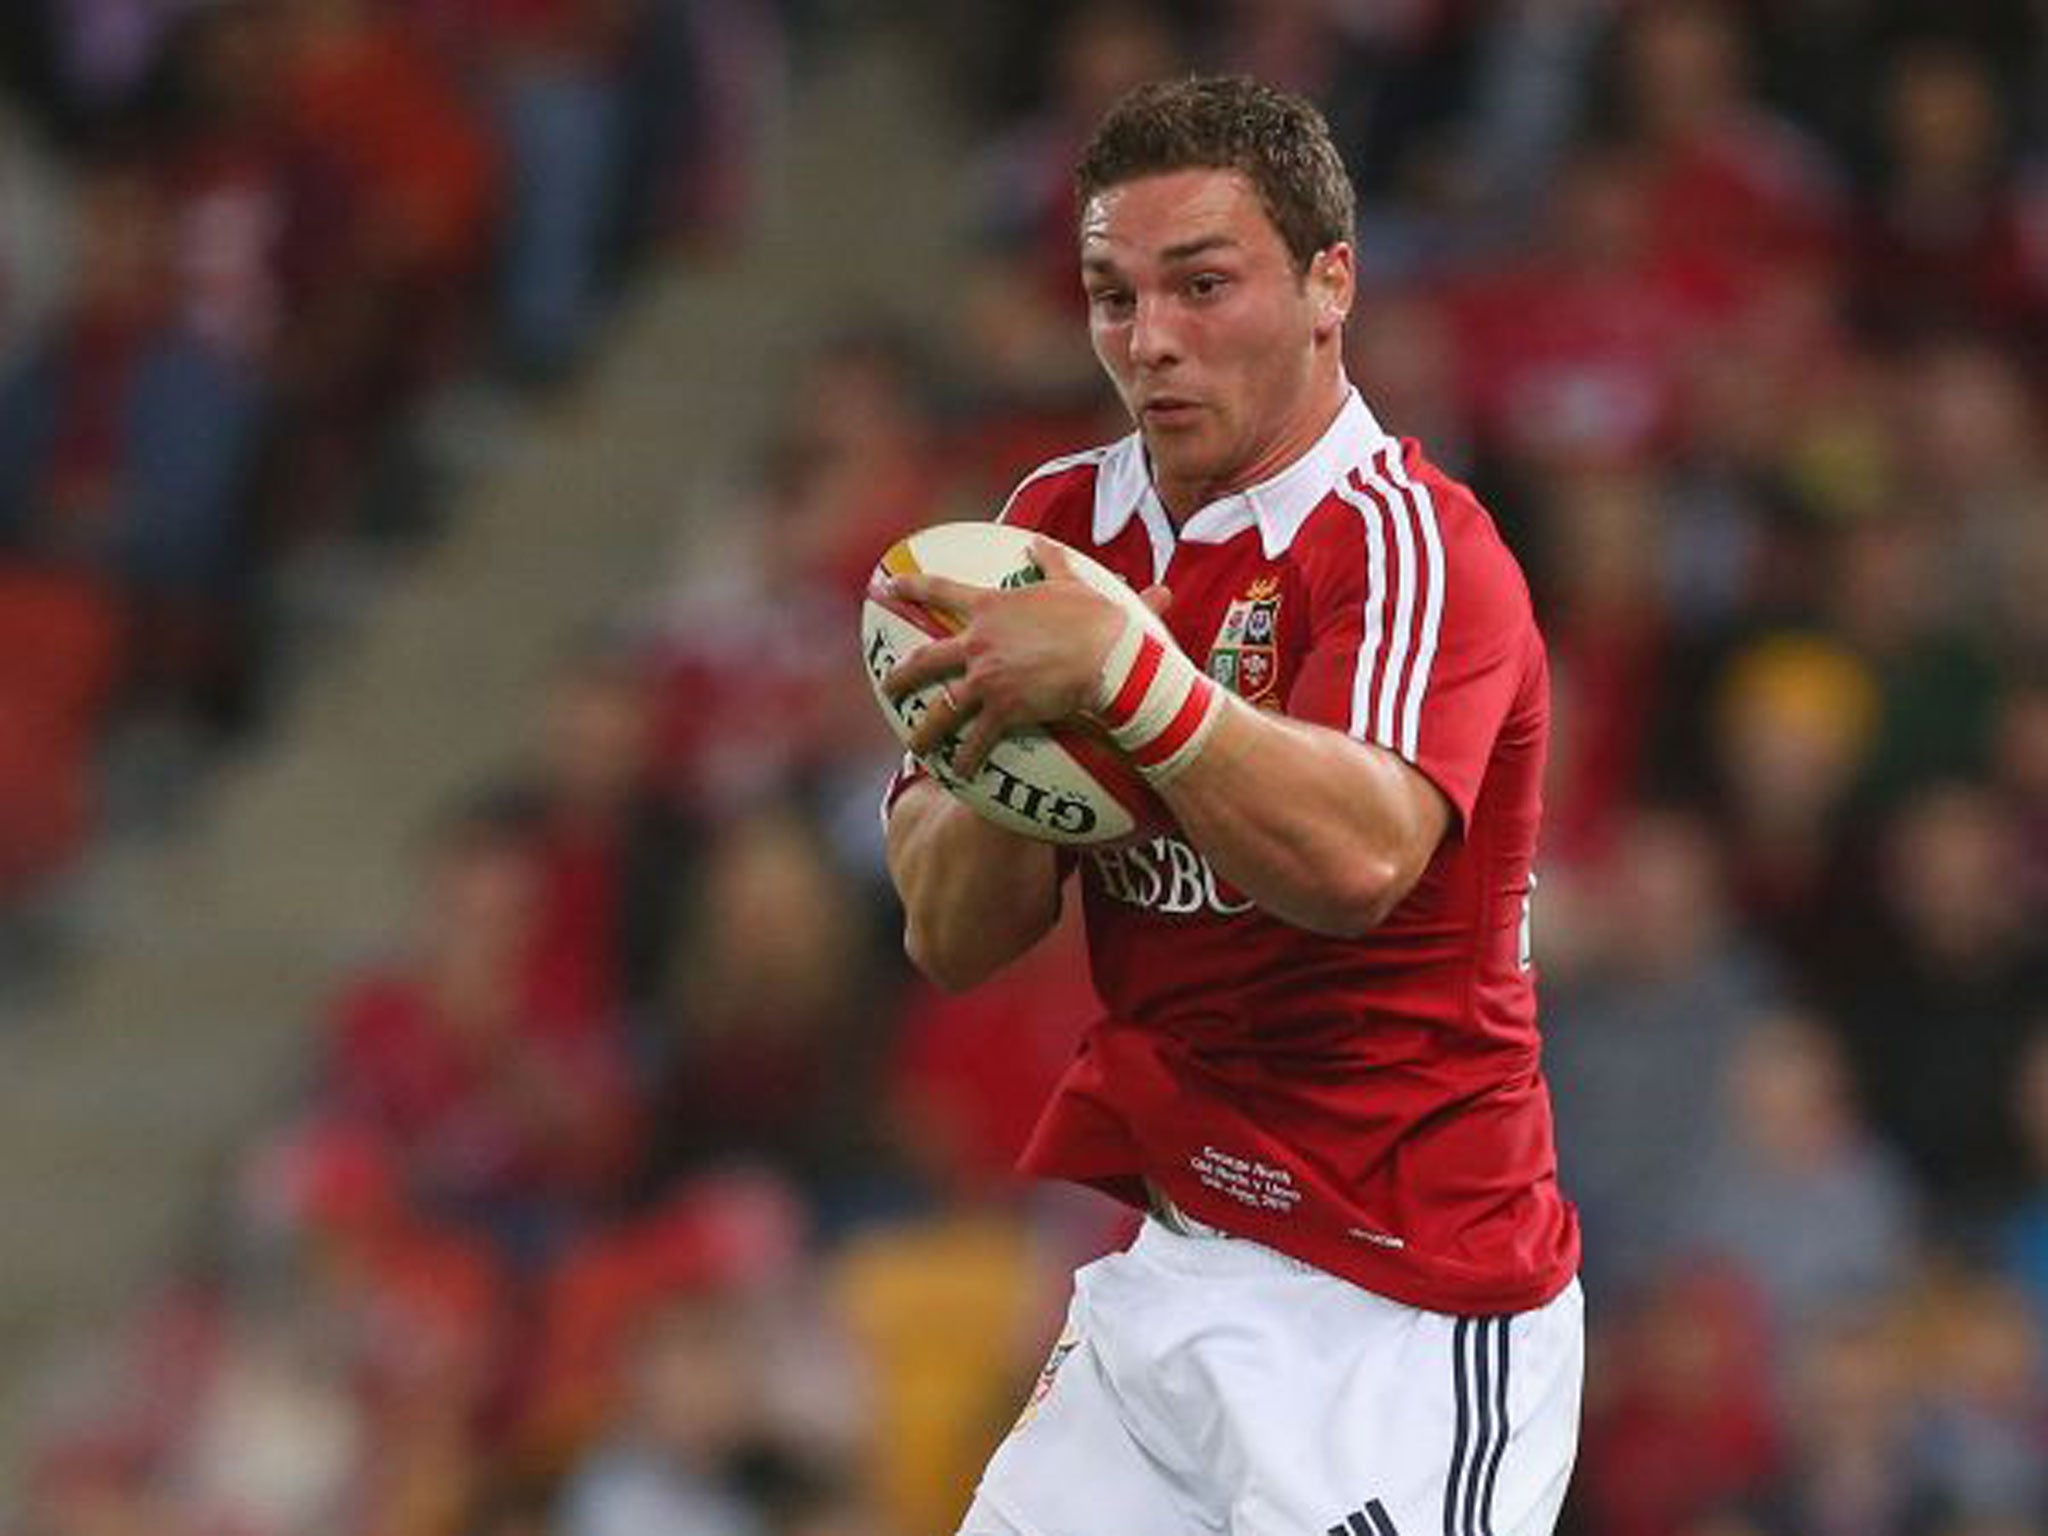 George North, the standout Lion, has recovered from a hamstring injury